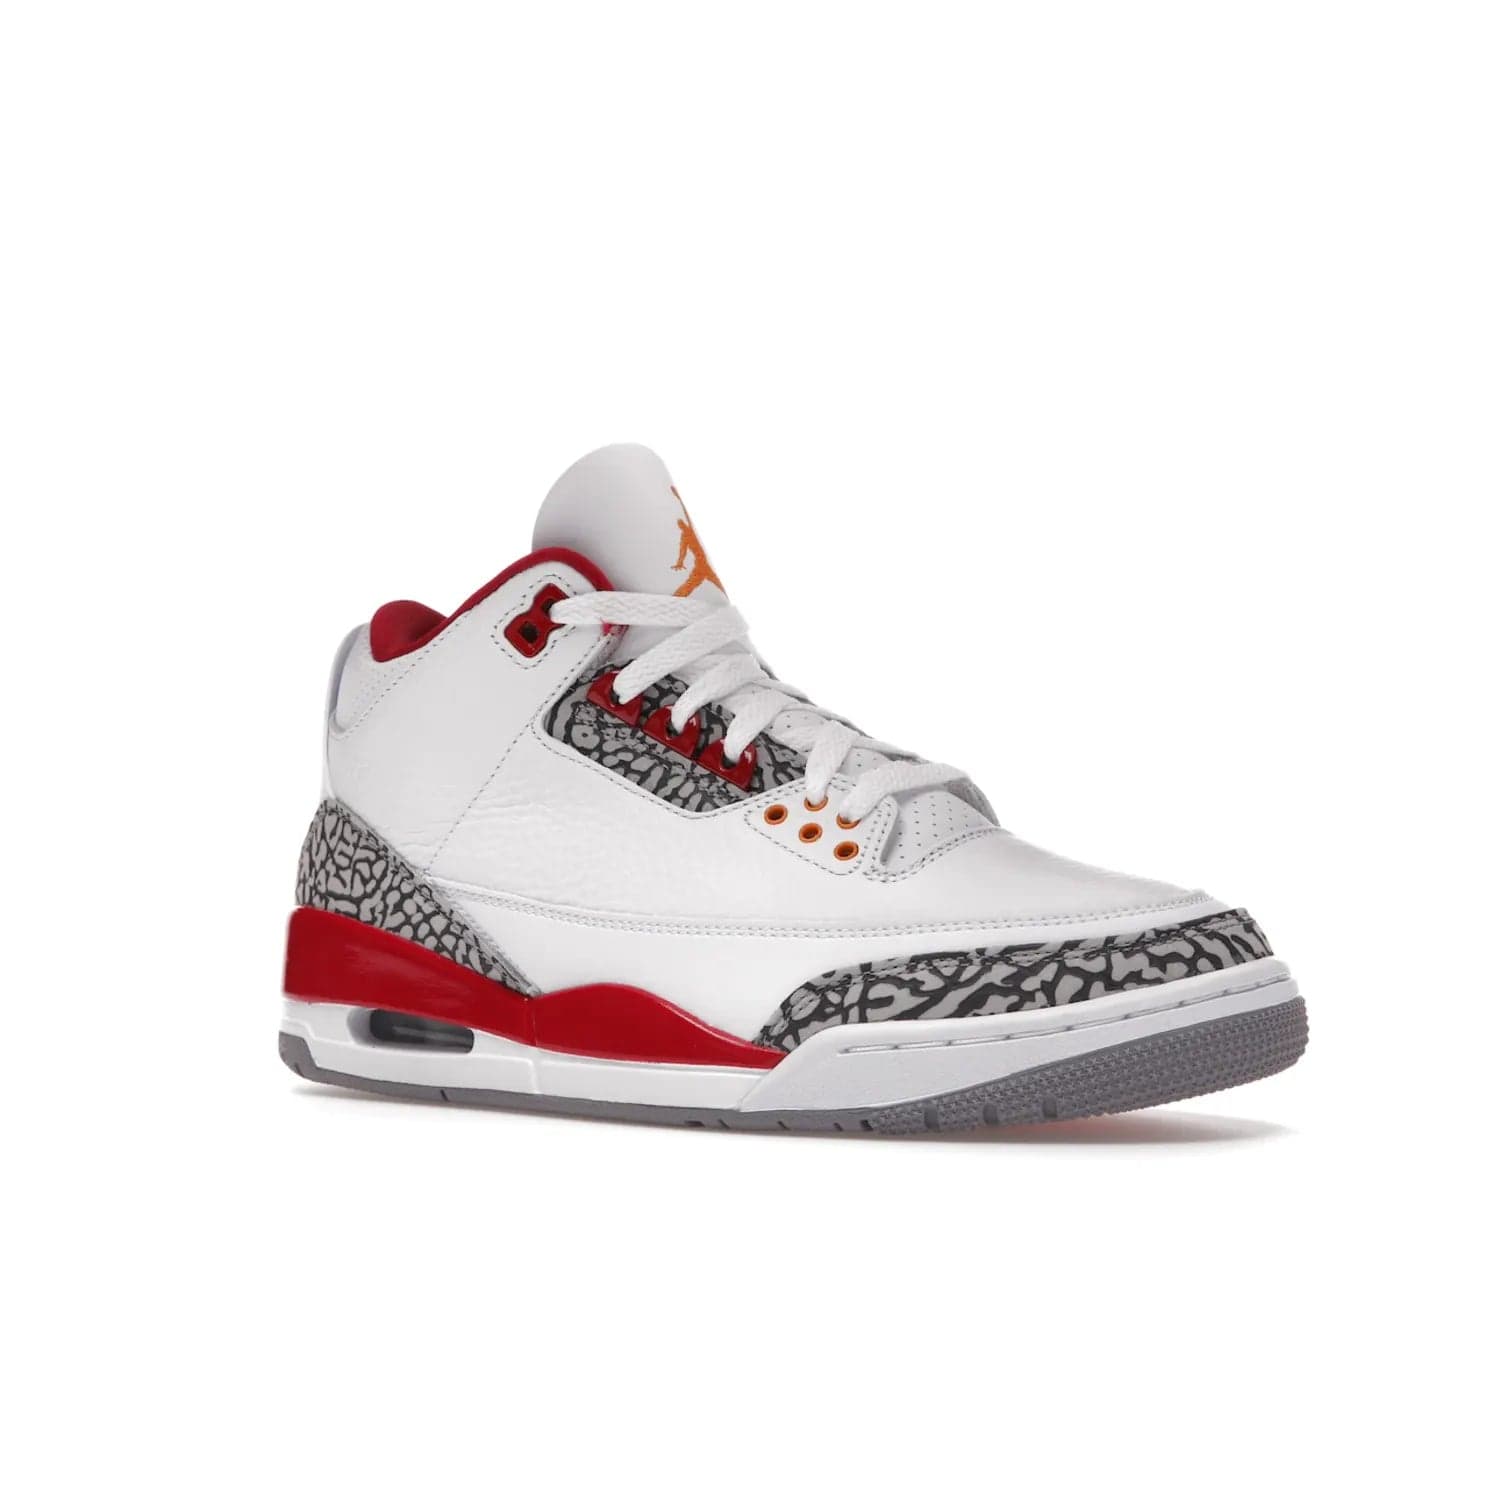 Jordan 3 Retro Cardinal Red - Image 5 - Only at www.BallersClubKickz.com - Air Jordan 3 Retro Cardinal Red combines classic style and modern appeal - white tumbled leather, signature Elephant Print overlays, cardinal red midsoles, Jumpman logo embroidery. Available Feb 2022.